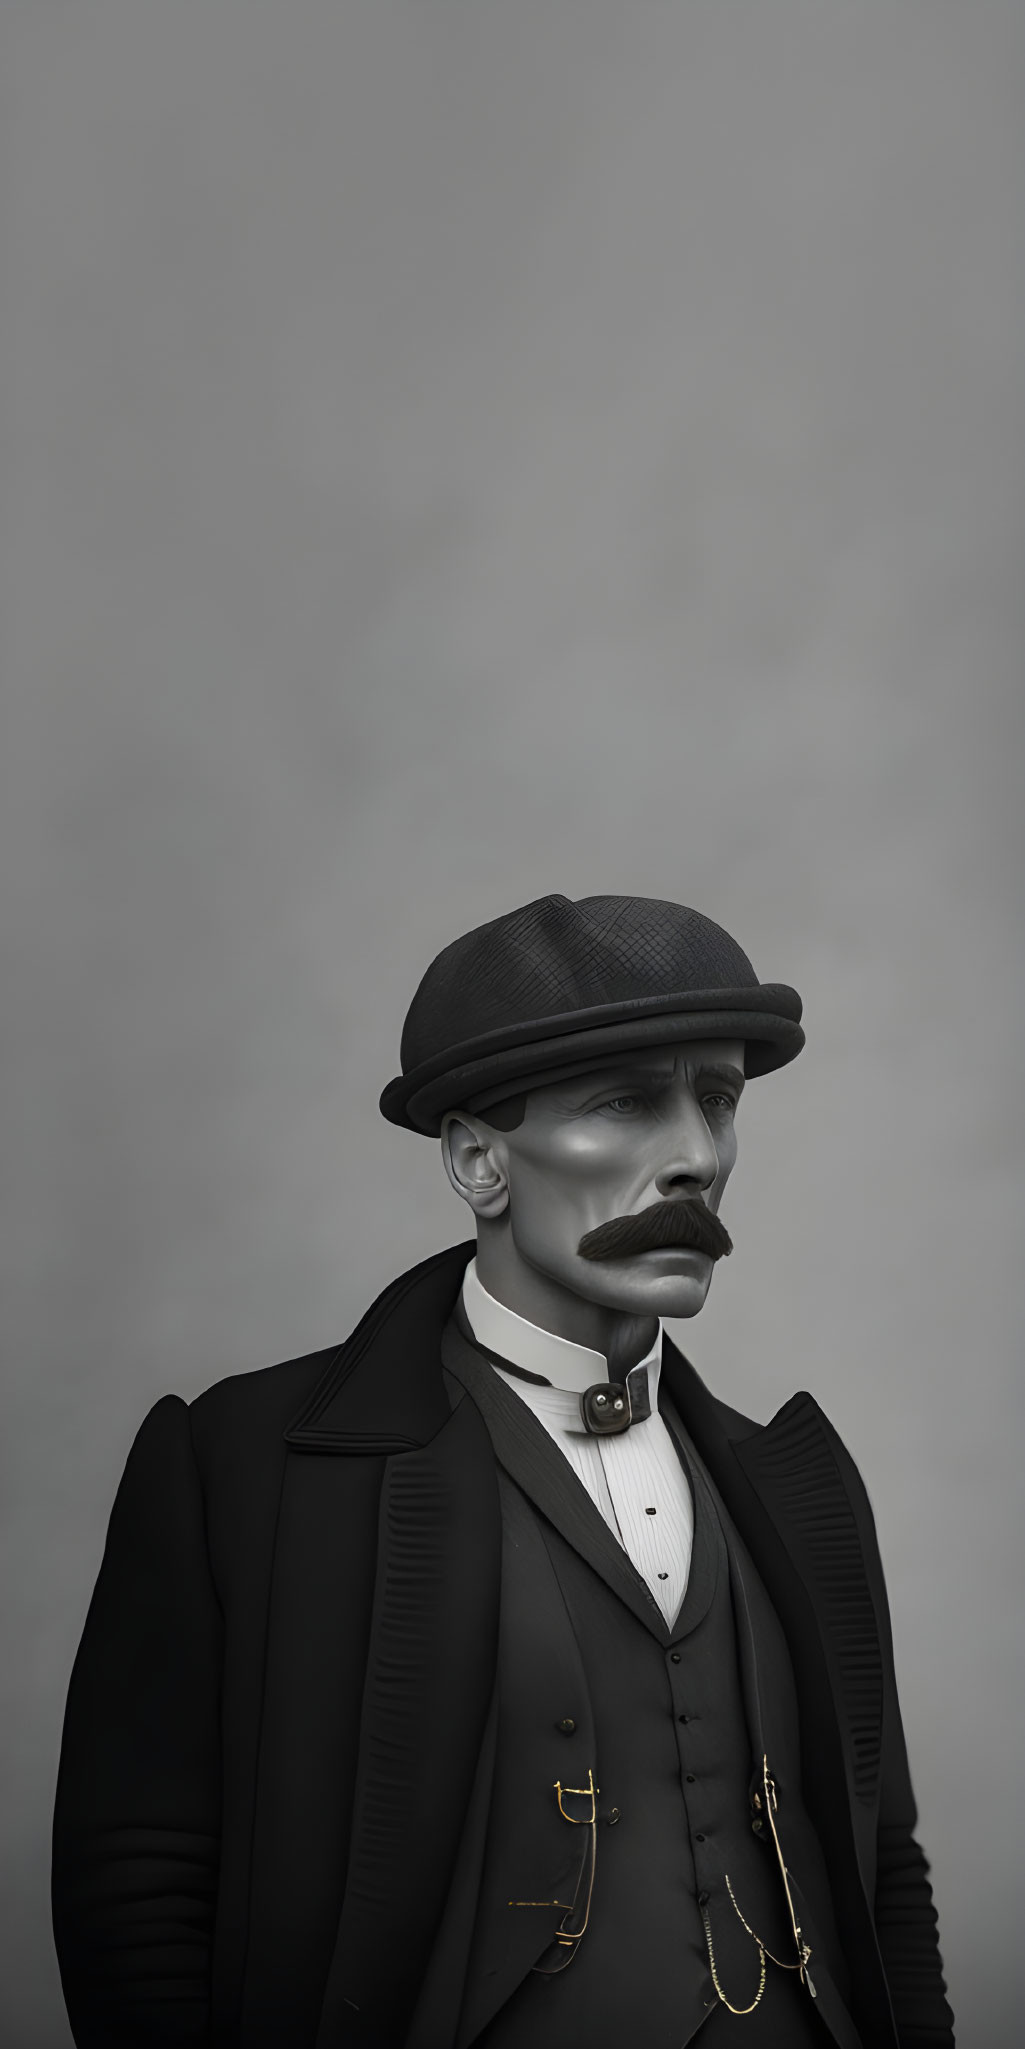 Vintage-style monochrome portrait of a stern man with a mustache and vintage attire.